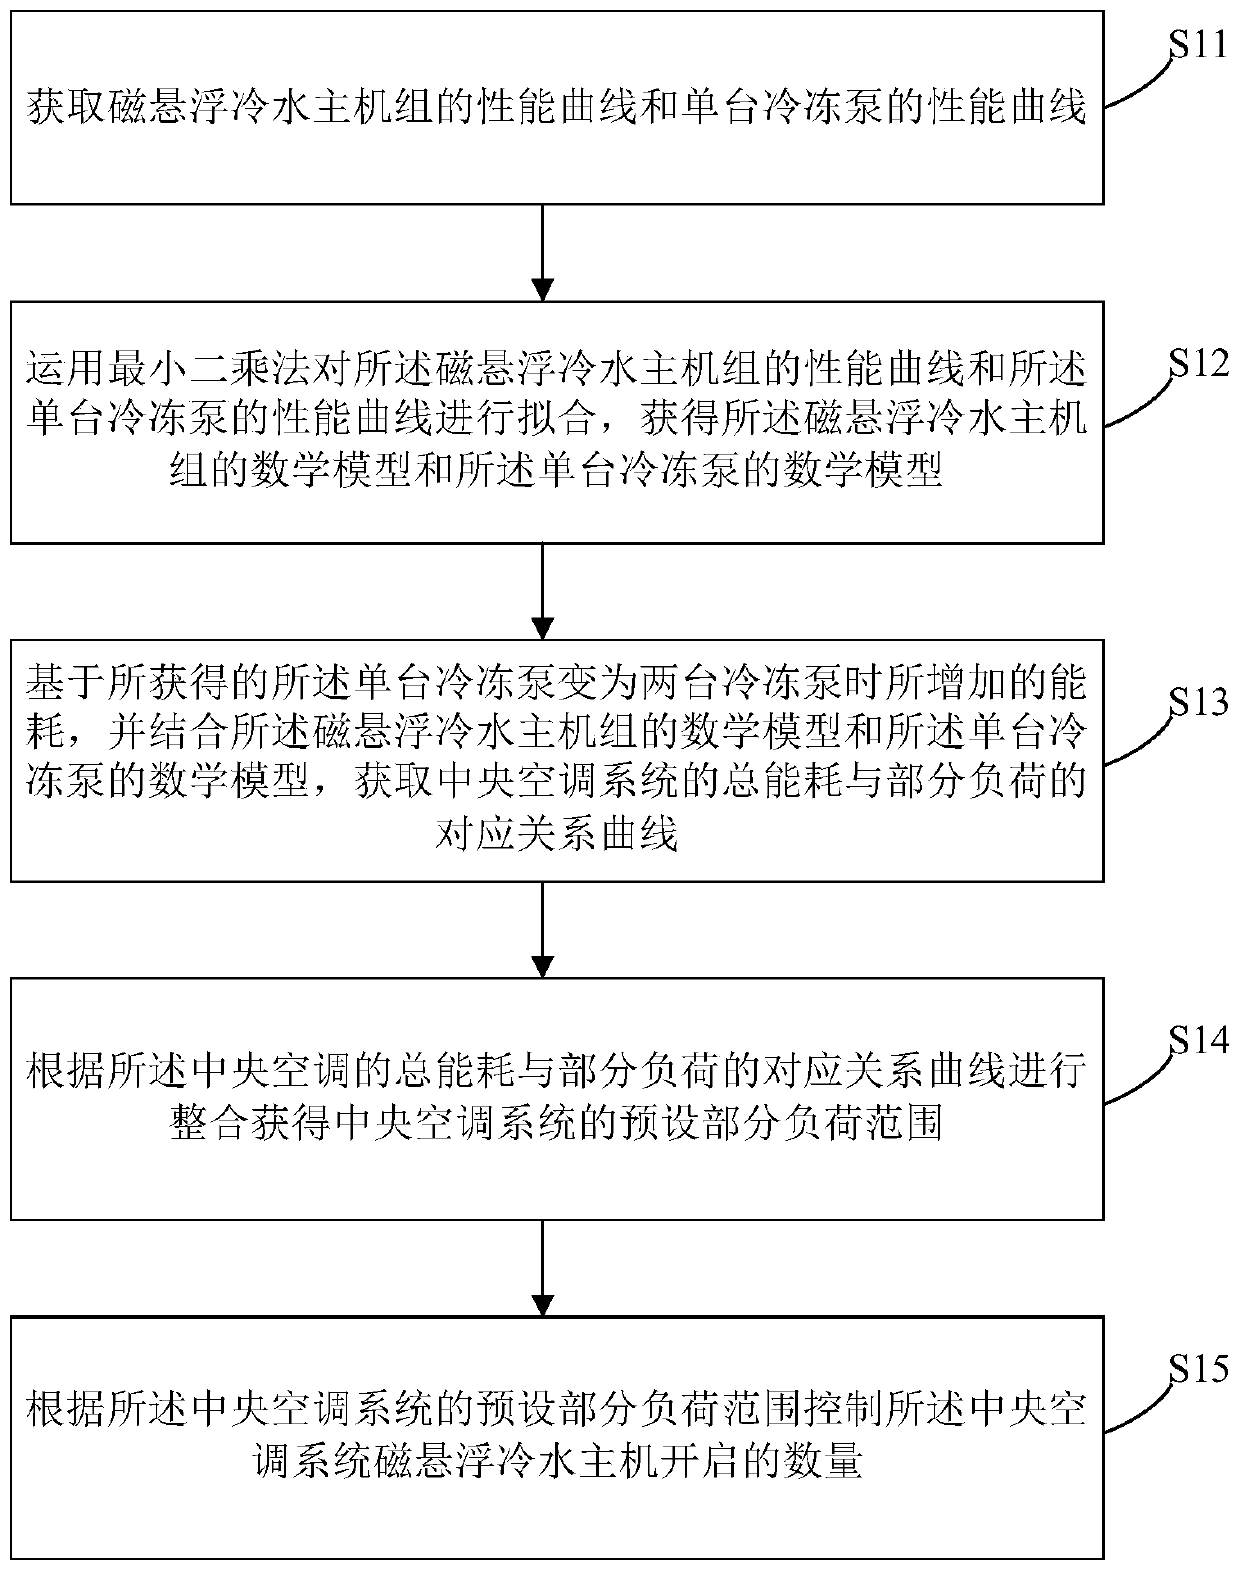 Control method and device for magnetic levitation chiller main engine of office building central air-conditioning system